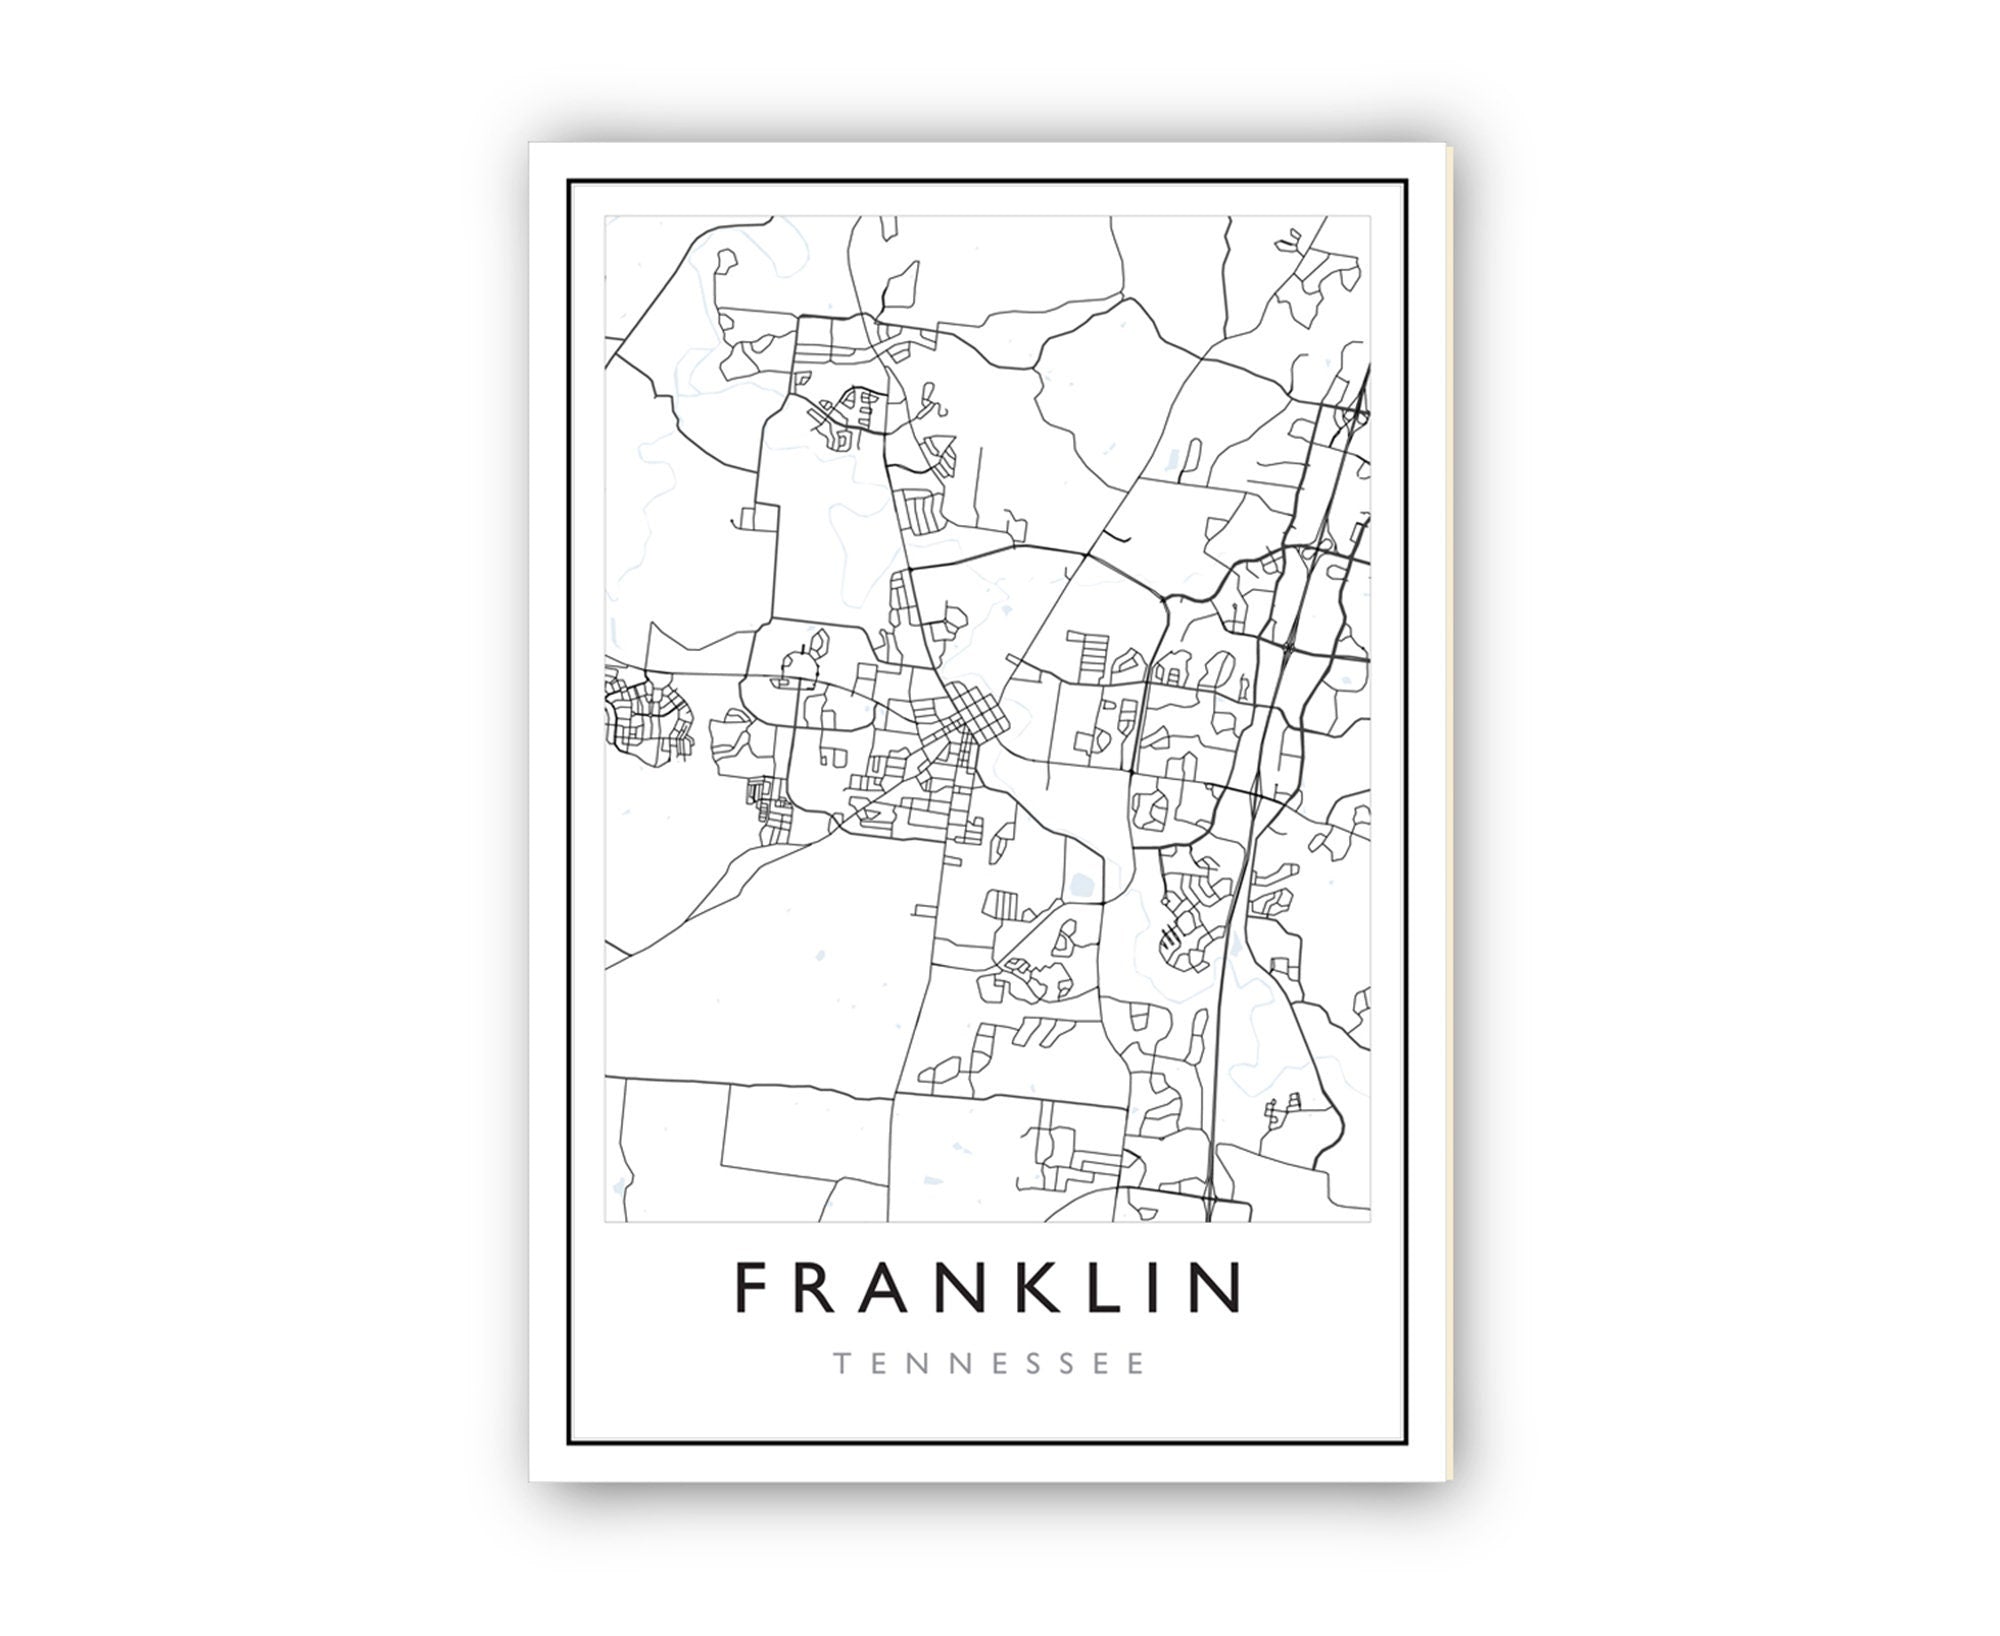 Franklin Tennessee City Map, Tennessee City Road Map Poster, City Street Map Print, Modern US City Map, Home Art Decor, Office Wall Art